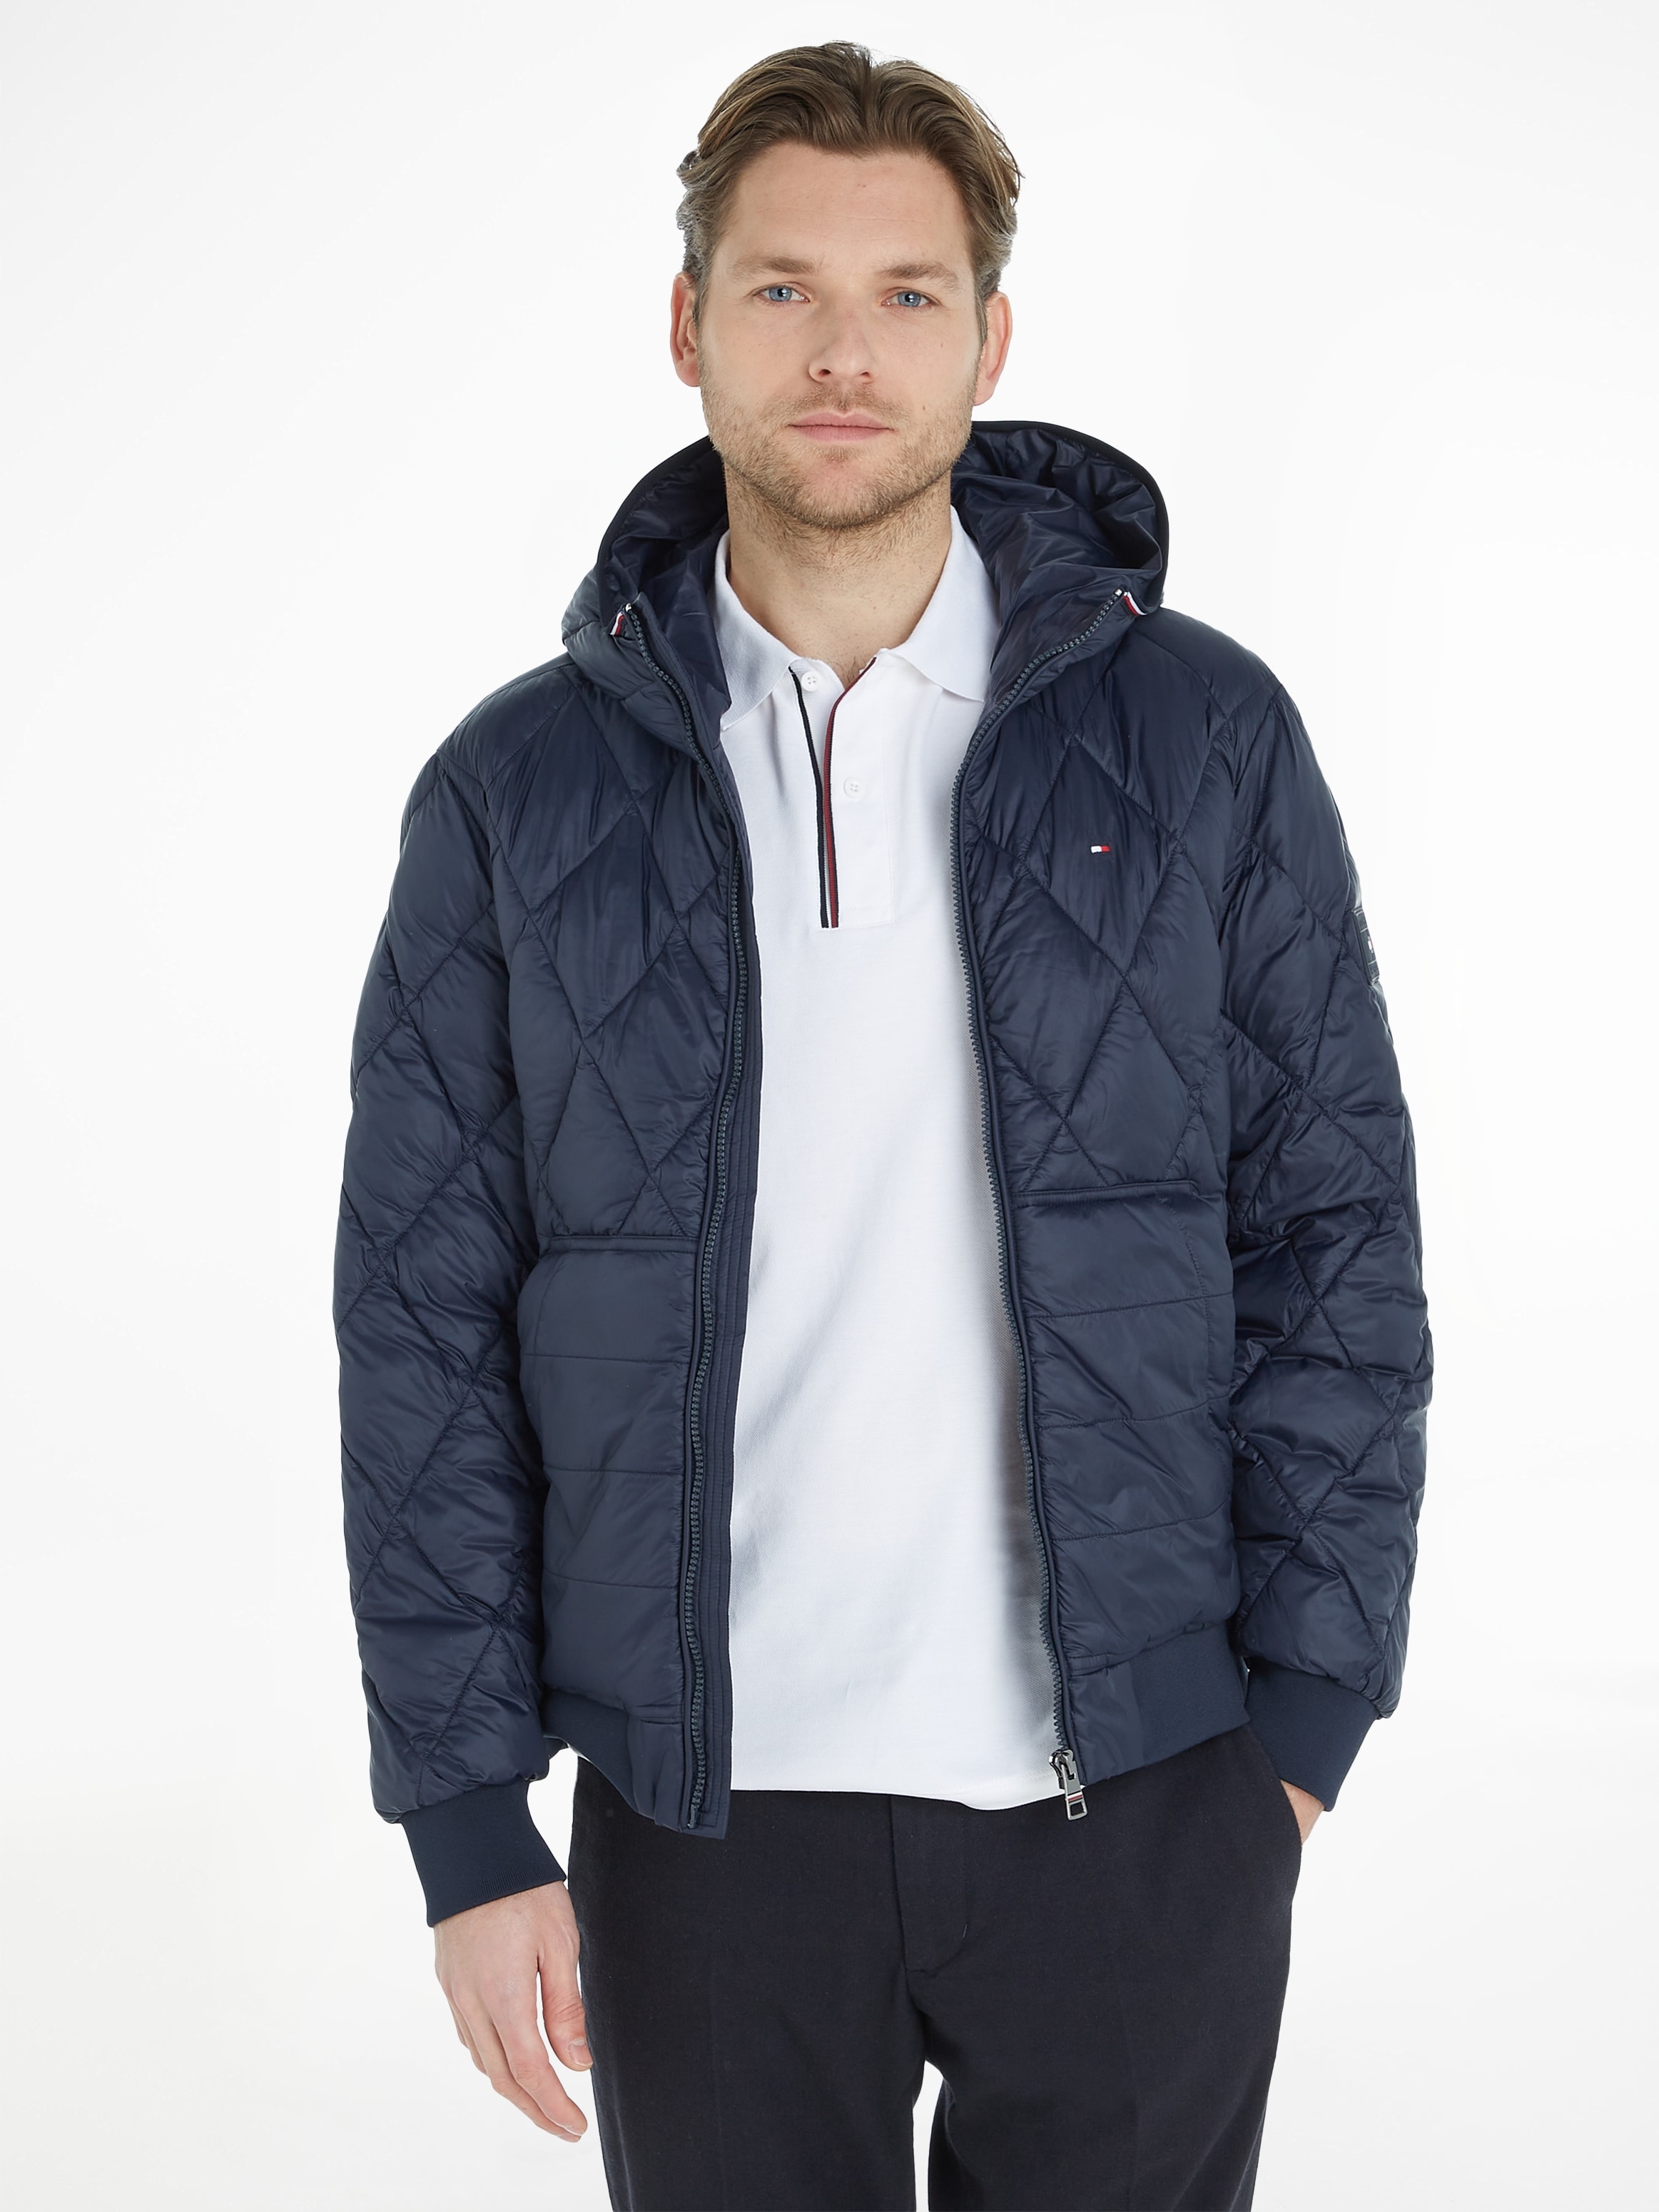 mit bei ♕ Tommy RECYCLED«, Steppjacke Kapuze »MIX QUILT Hilfiger